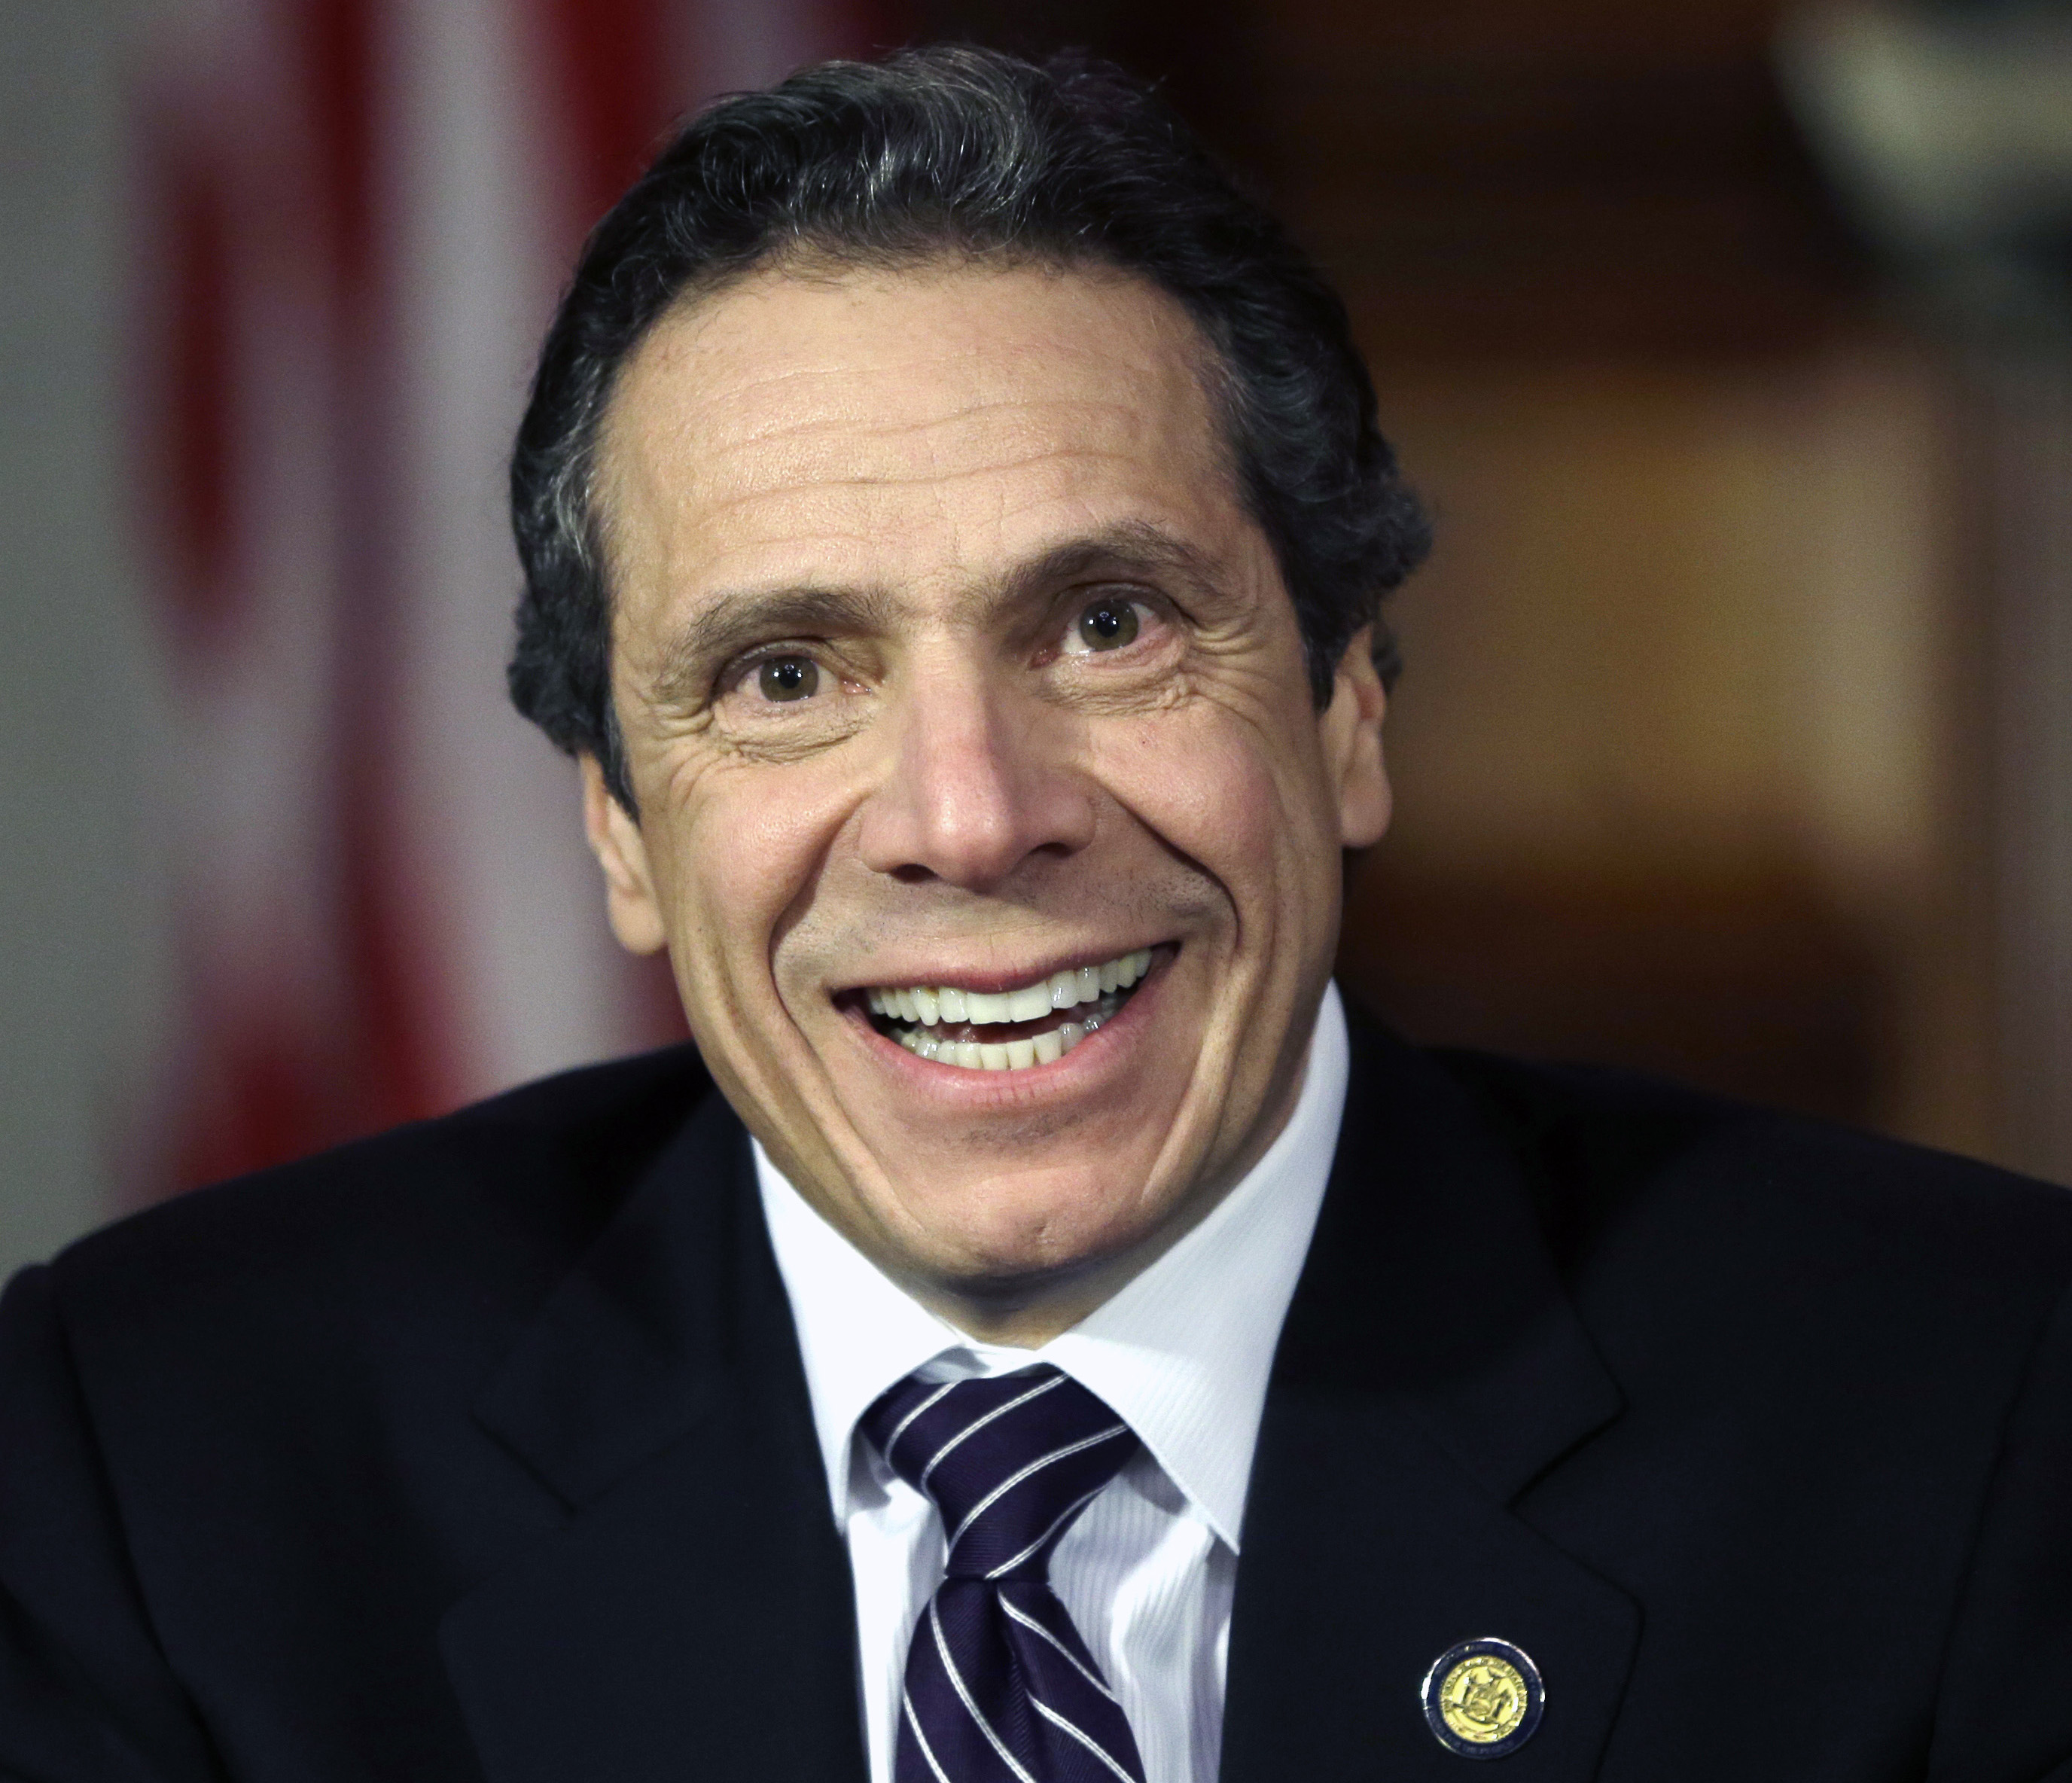 Cuomo, Clemency & The Cop-Killer - The Cromer Reader